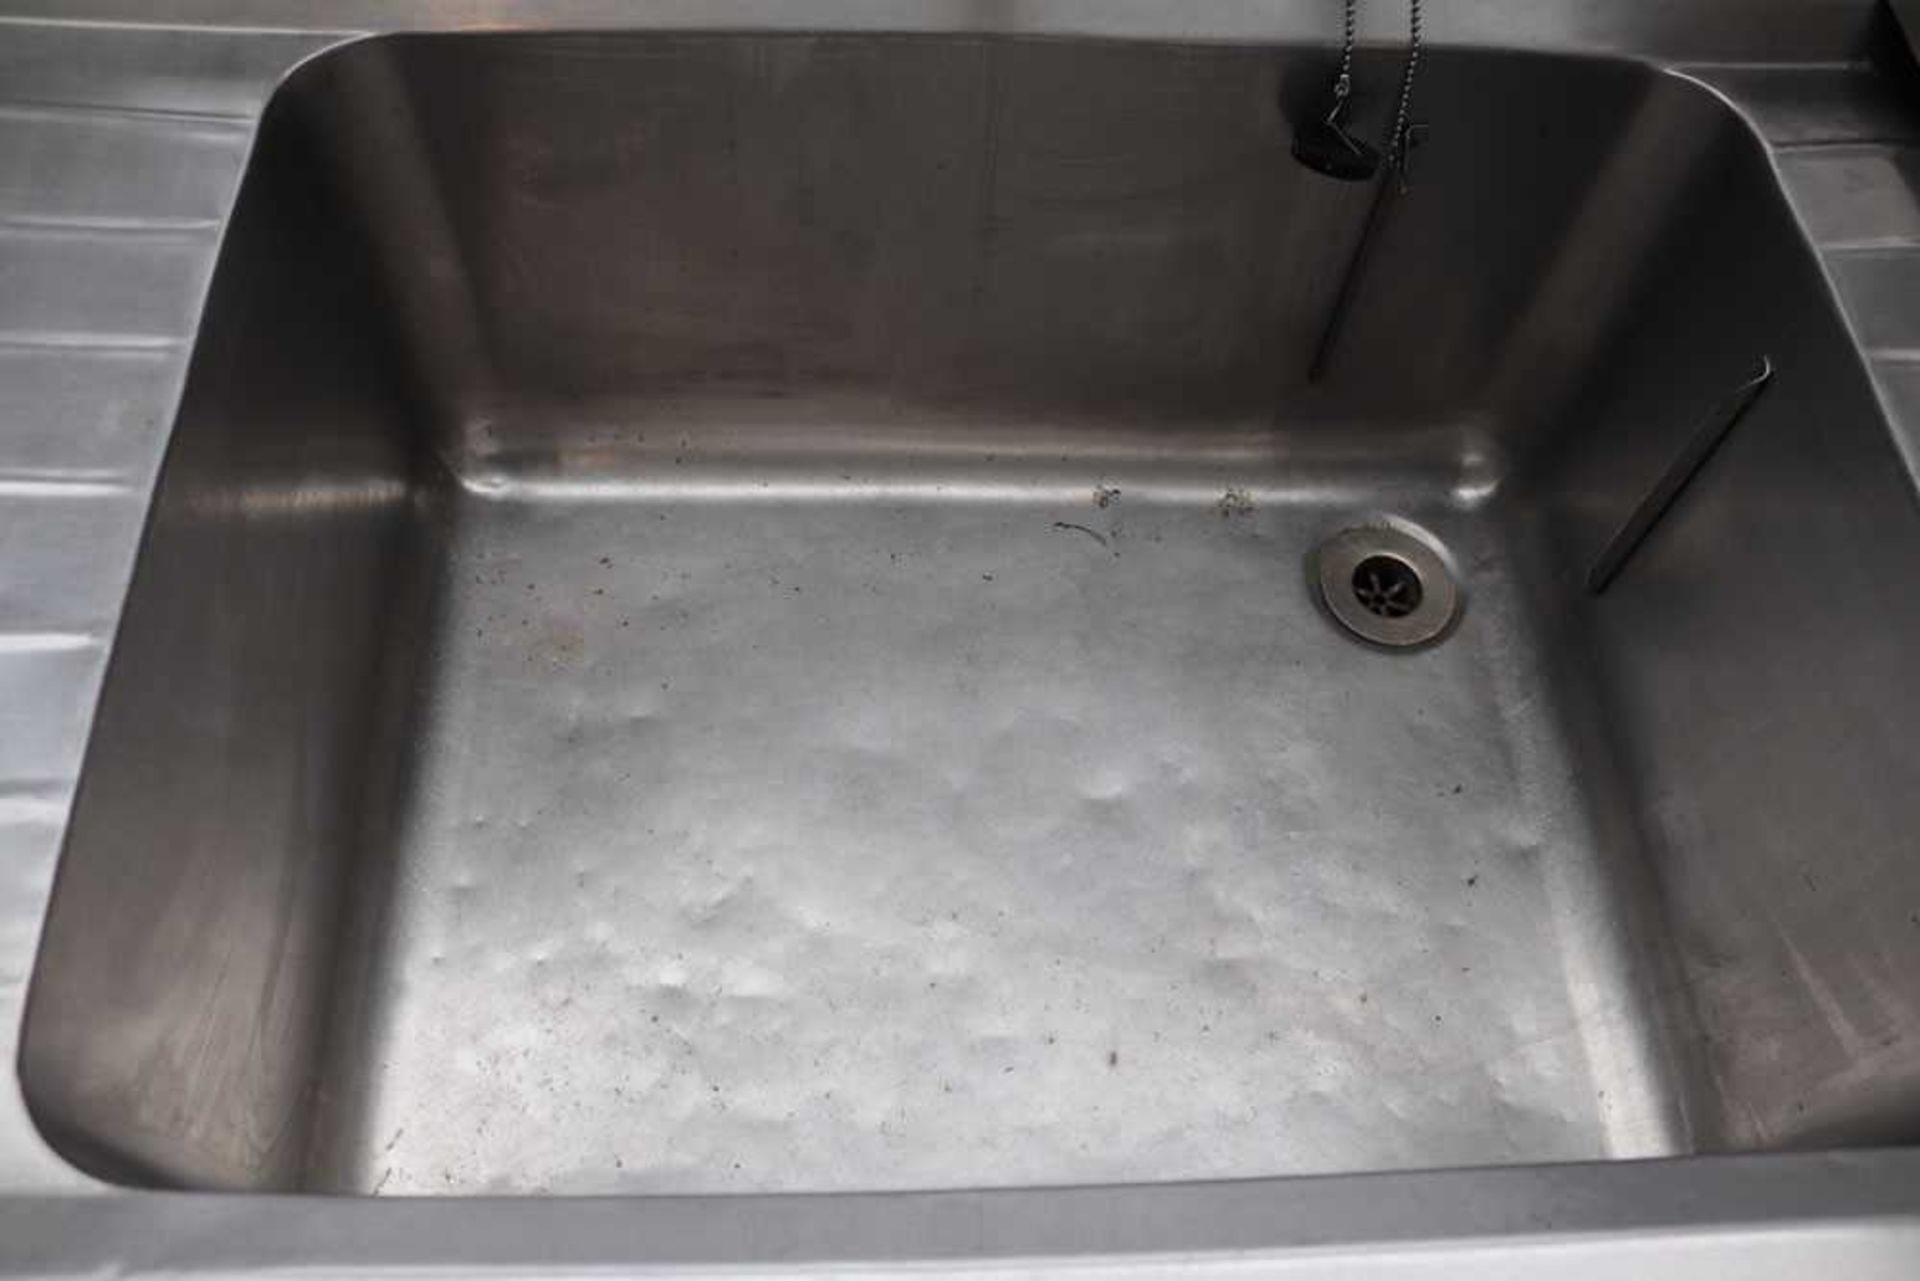 220cm deep bowl sink unit with double drainer and taps - Image 2 of 2